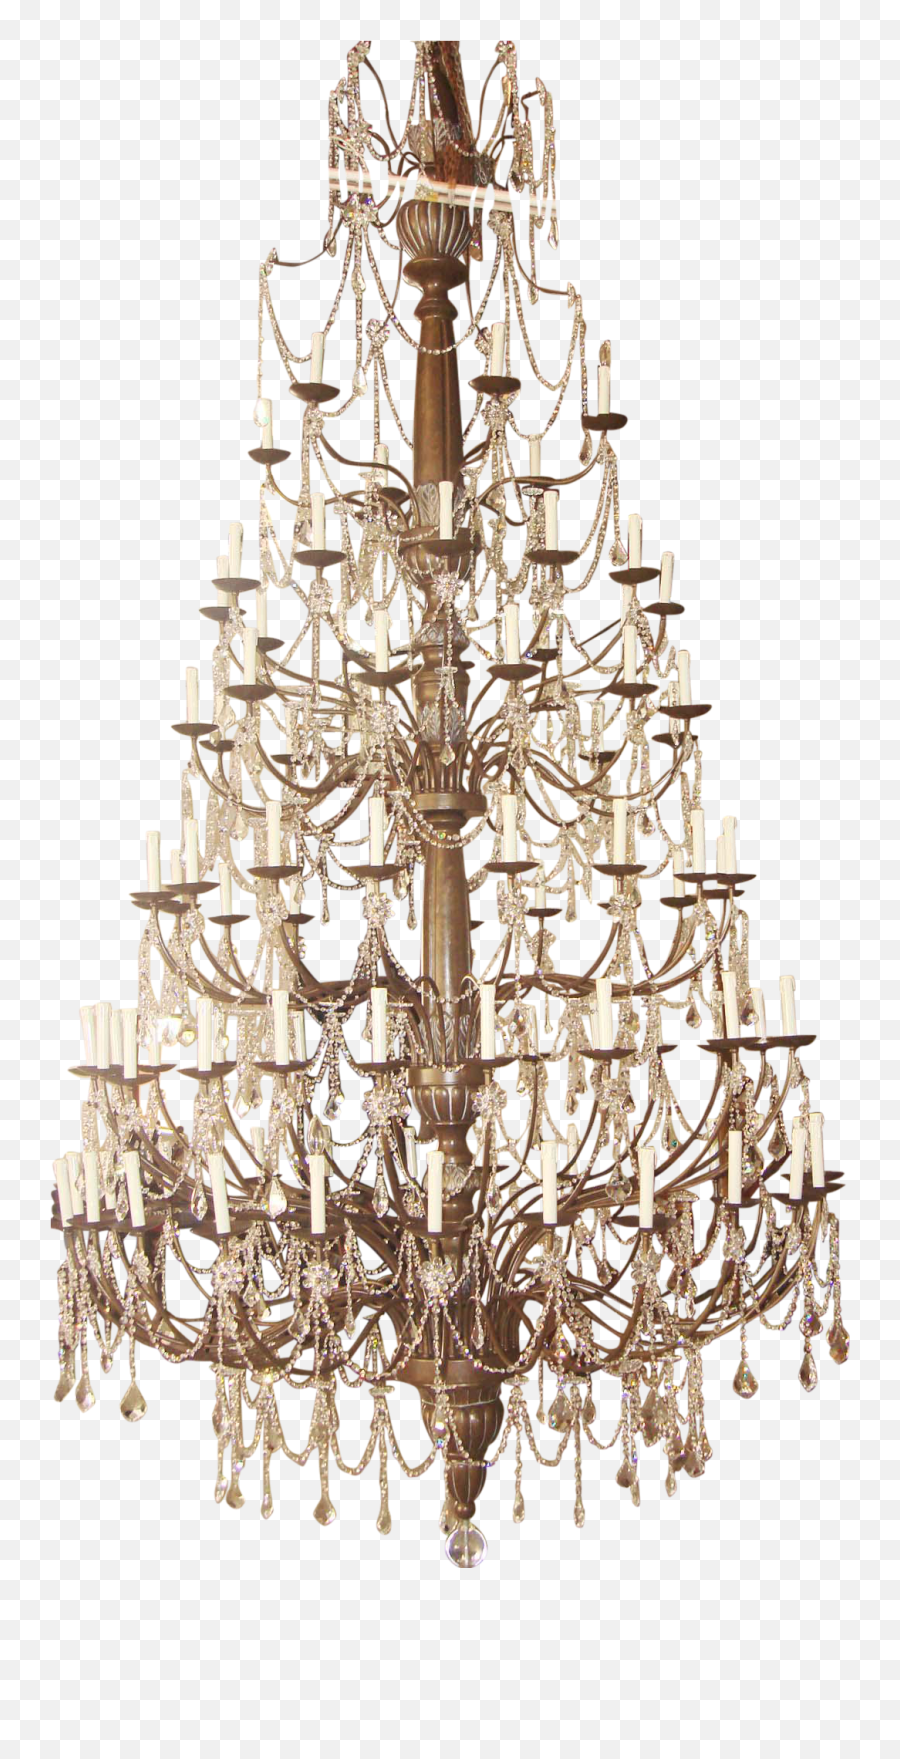 Juicy Couture Inspired Crystal Chandelier Design - Decorative Emoji,Juicy Couture Logo